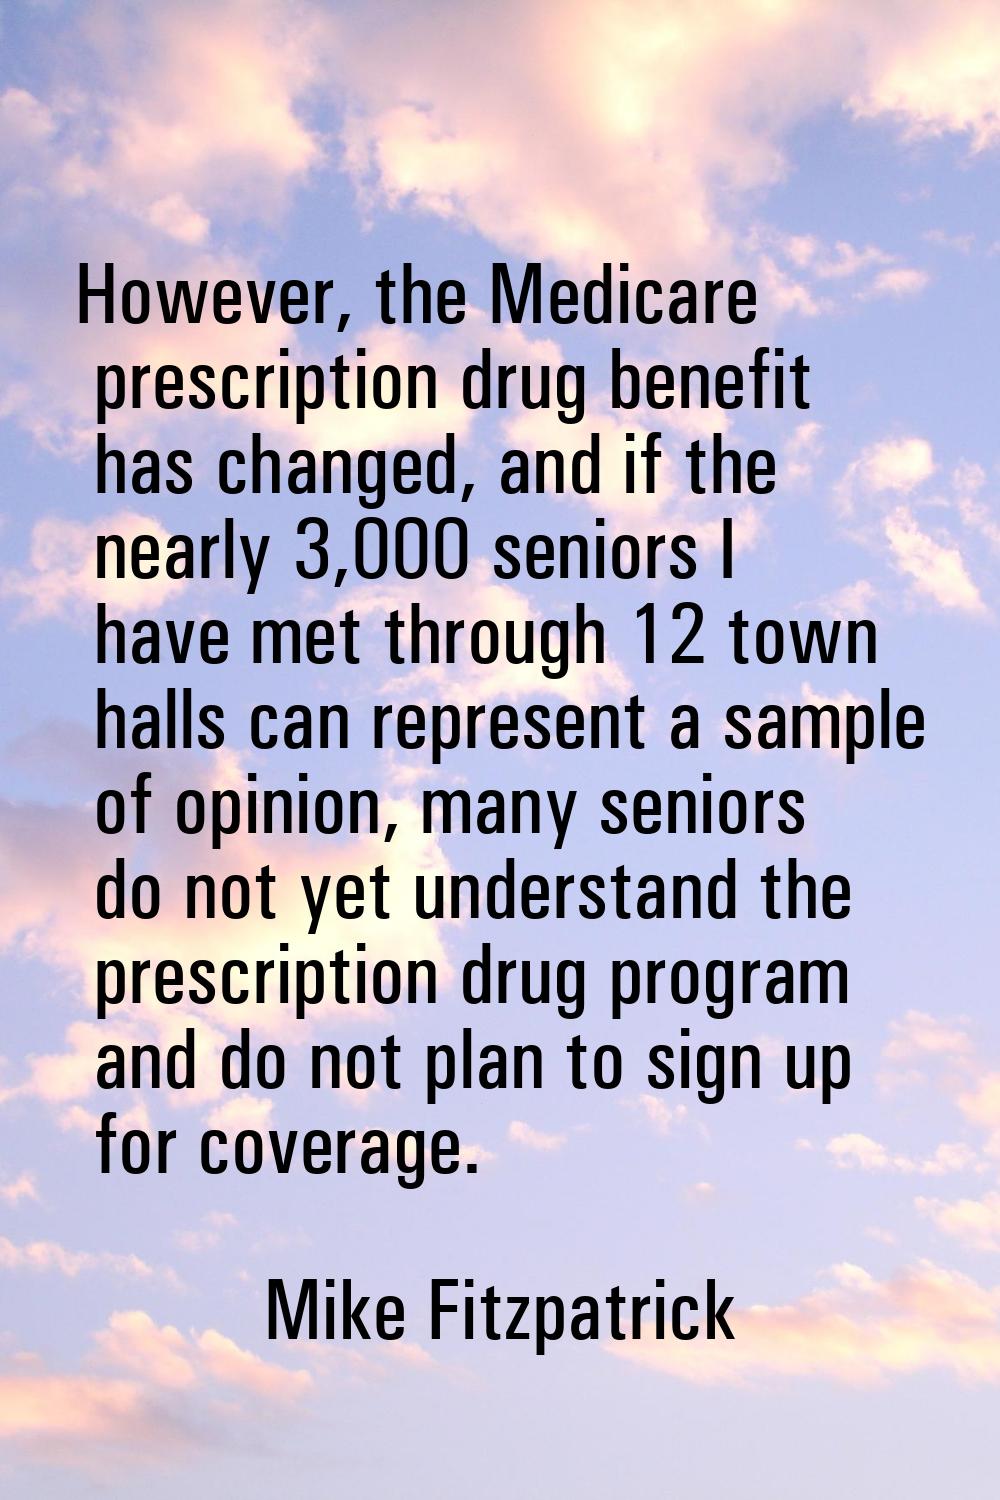 However, the Medicare prescription drug benefit has changed, and if the nearly 3,000 seniors I have